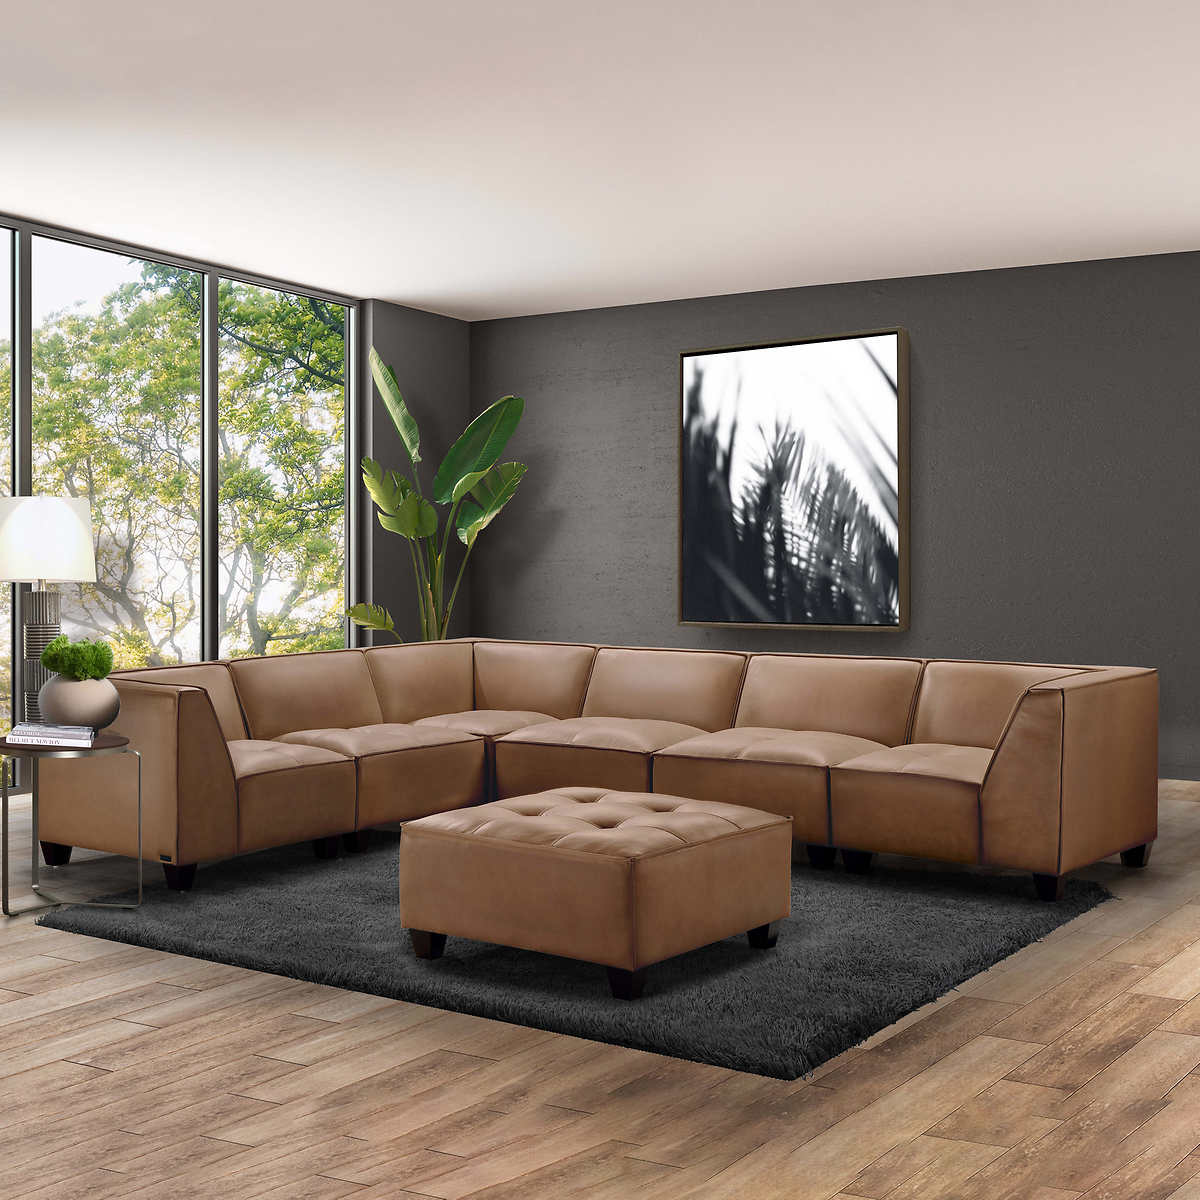 7 Piece Leather Modular Sectional, Camel Color Leather Sectional Sofa